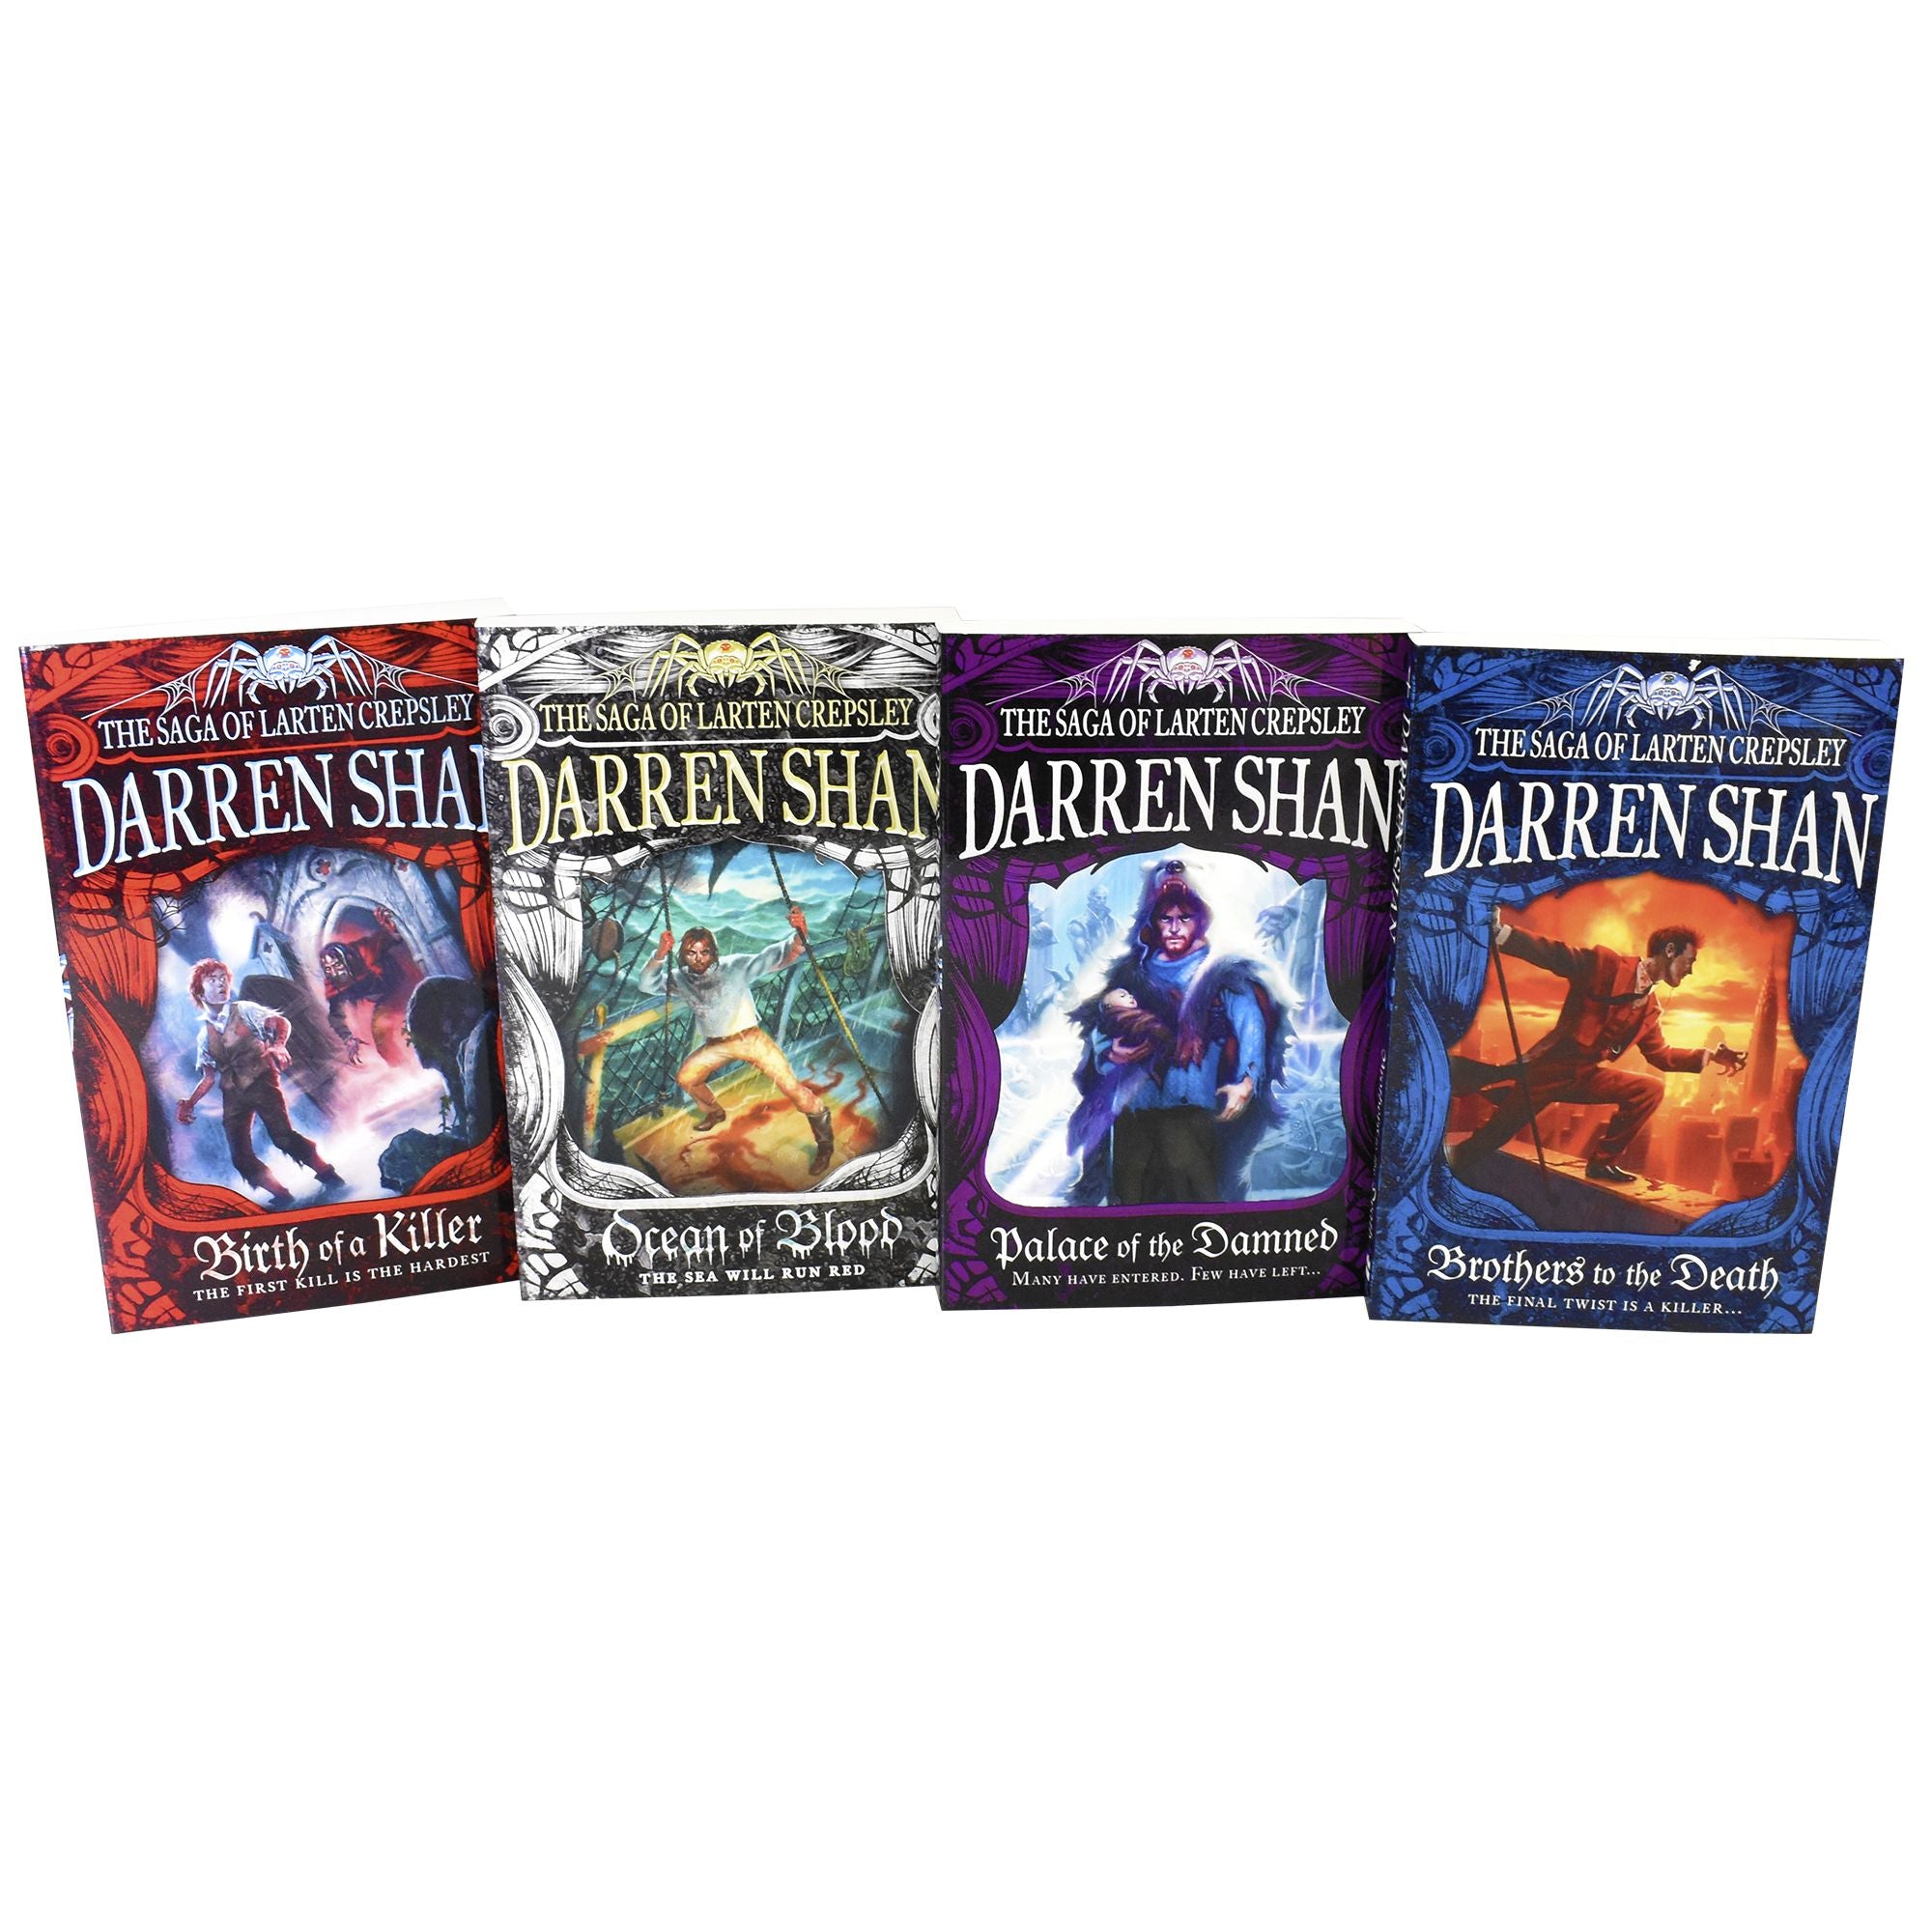 The Saga of Larten Crepsley Series 4 Books Collection Set by Darren Shan - Ages 9 years and up - Paperback